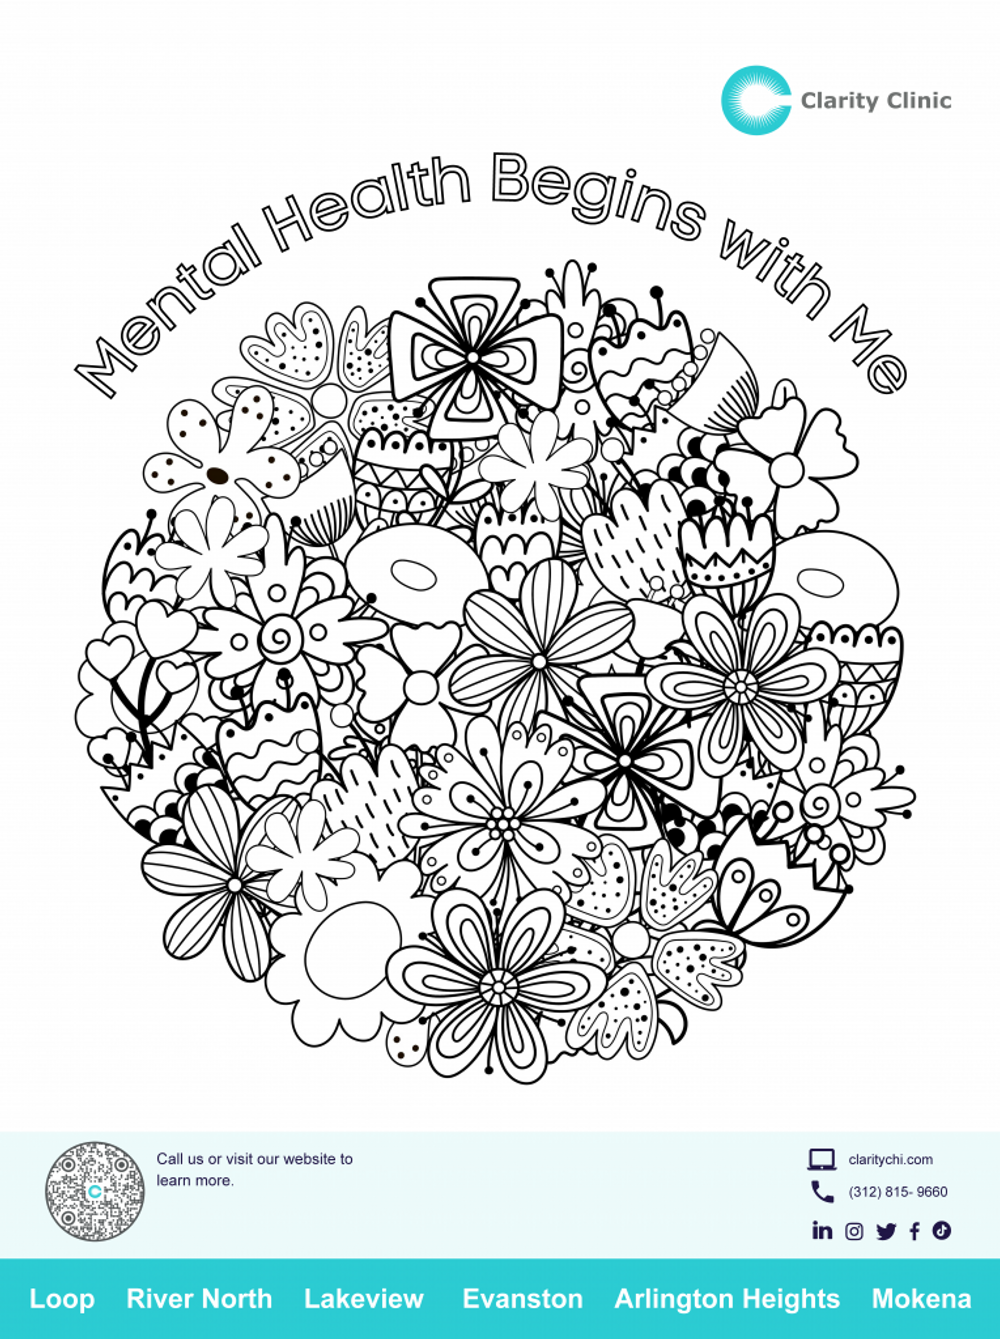 Clarity Clinic Coloring Sheet - Mental Health Begins with Me